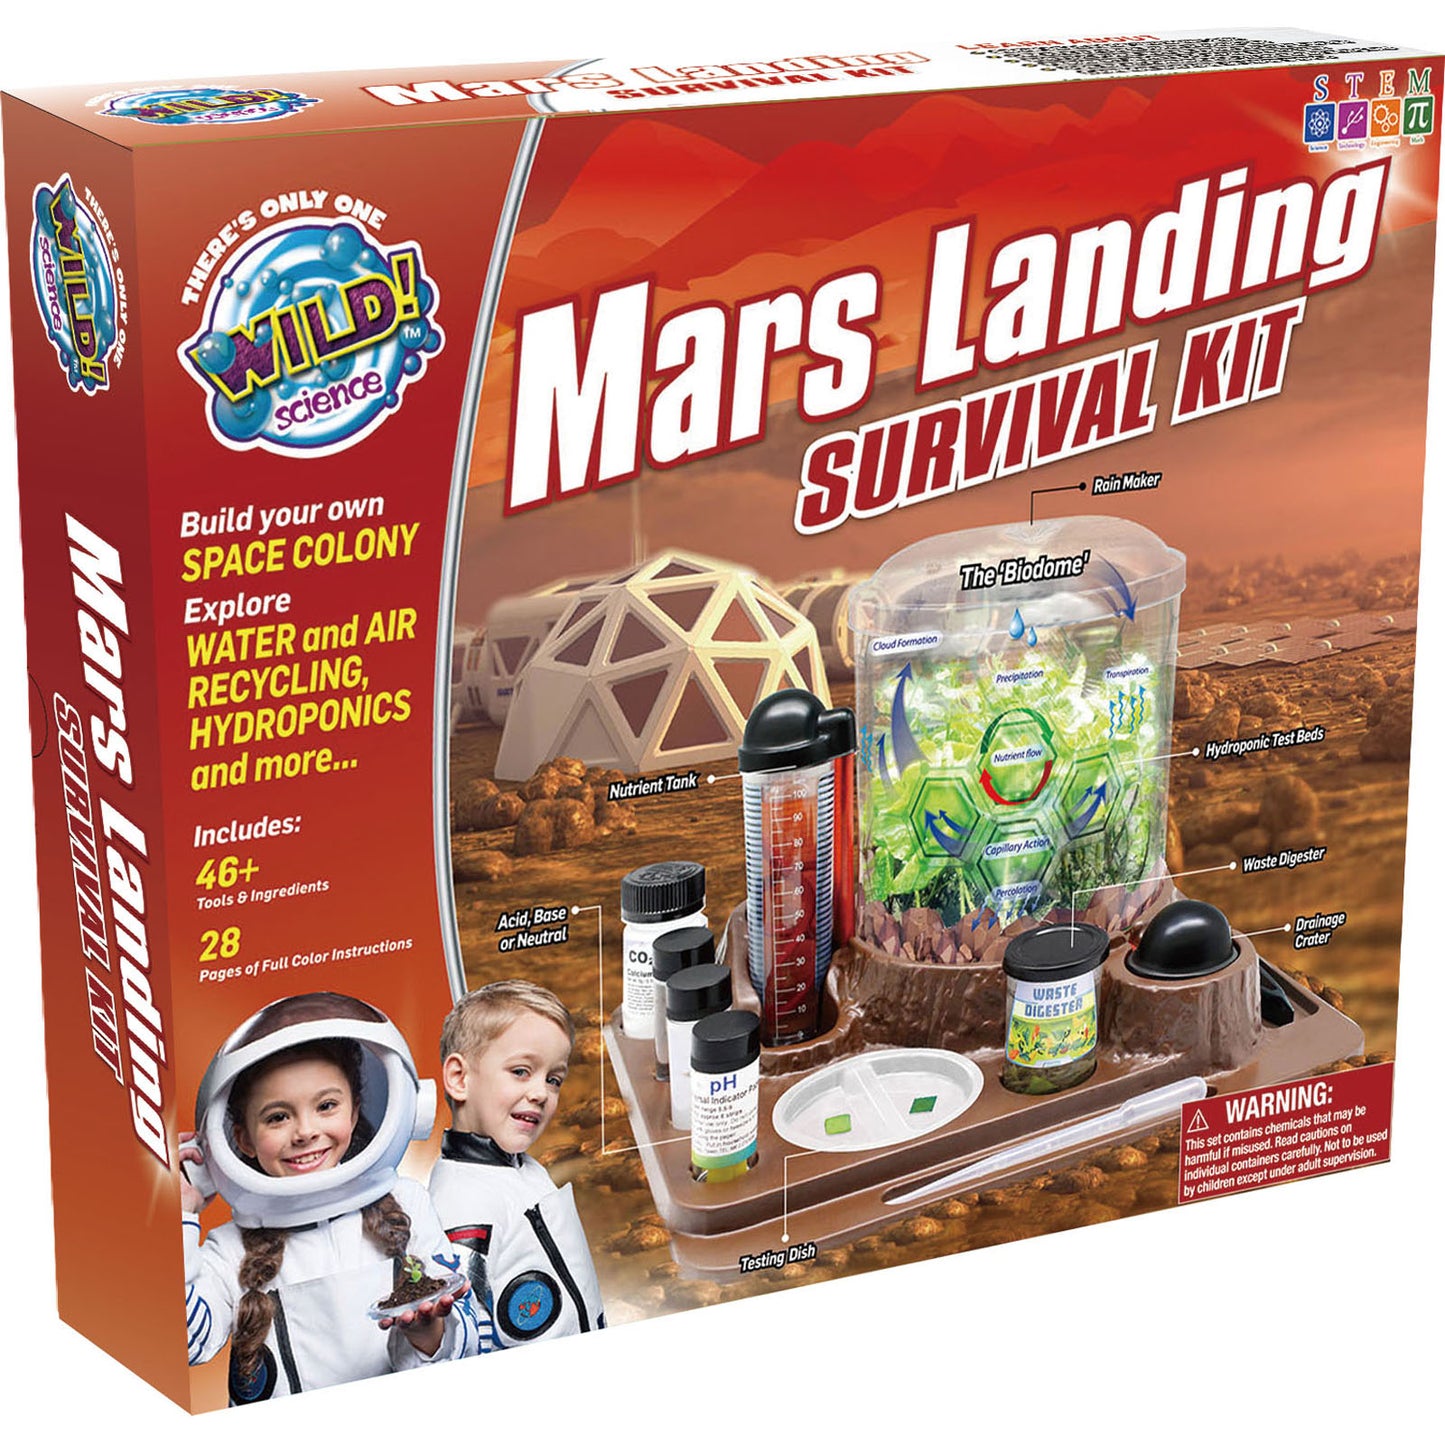 Mars Landing Survival Kit - Home STEM Kit - Ages 8+ - Grow Food & Build an Earth-Like Environment on Mars - Seeds Included